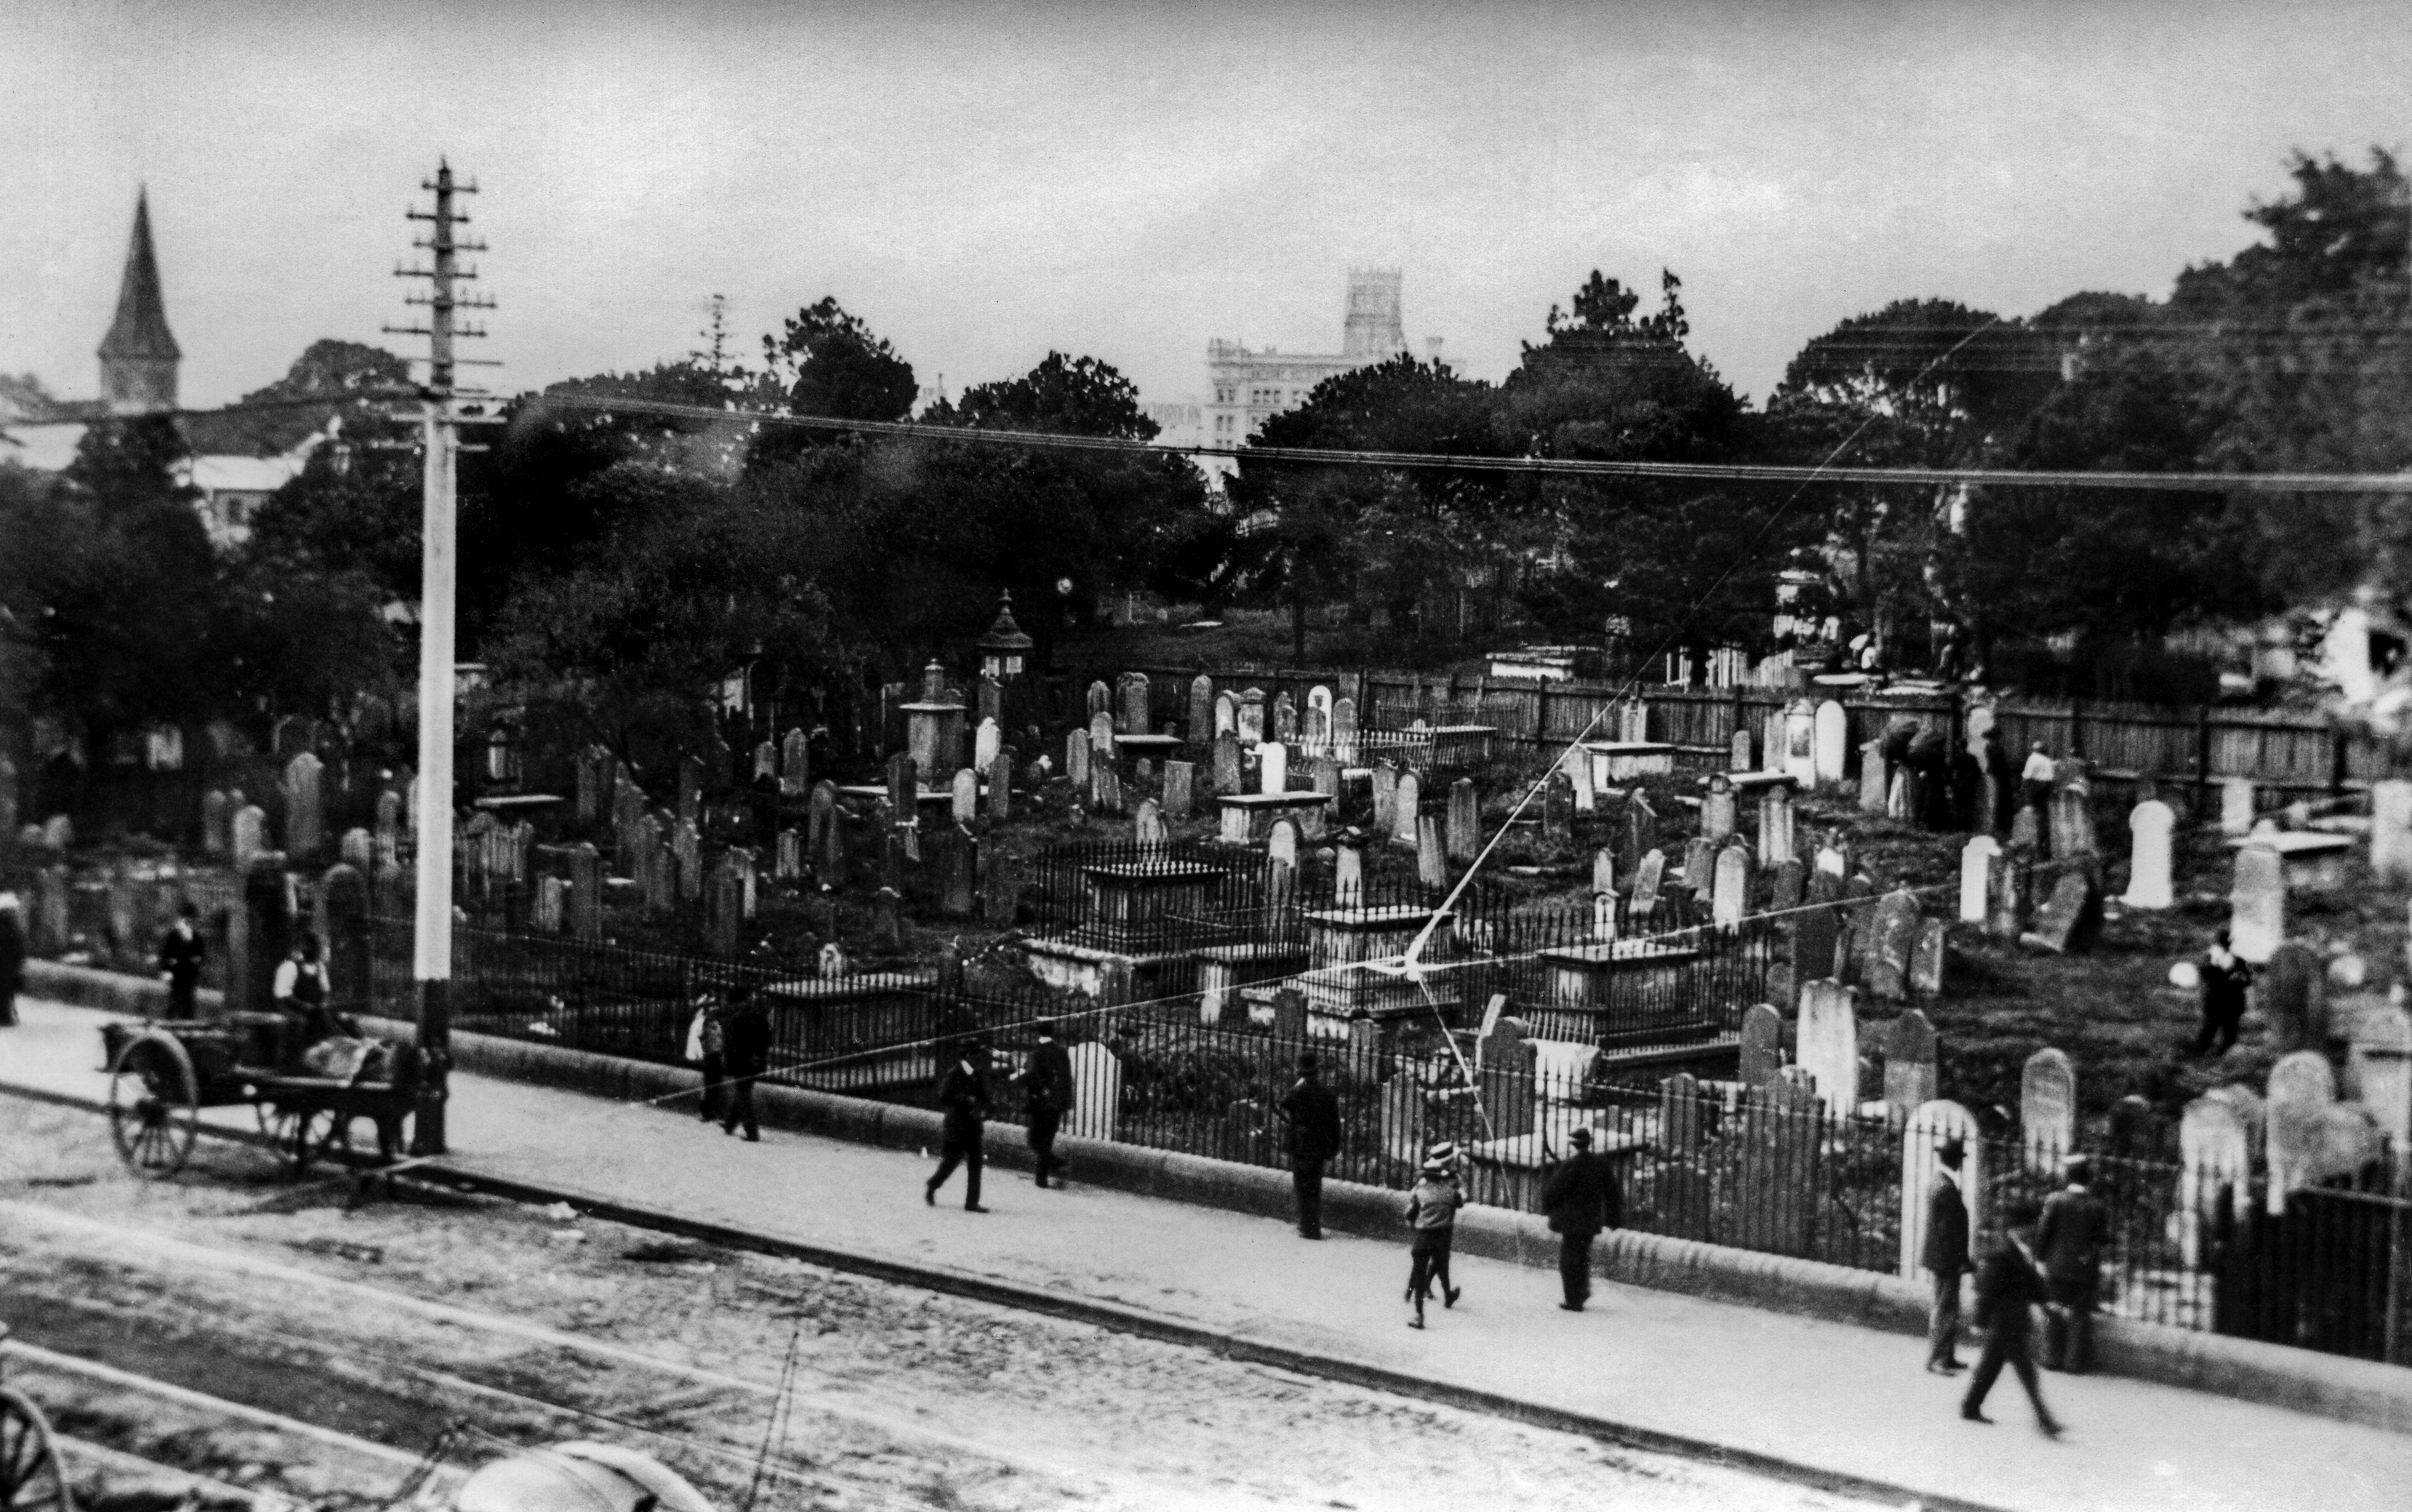 Looking northwest from Devonshire Street, Surry Hills, 1890. Credit: City of Sydney Archives 031583